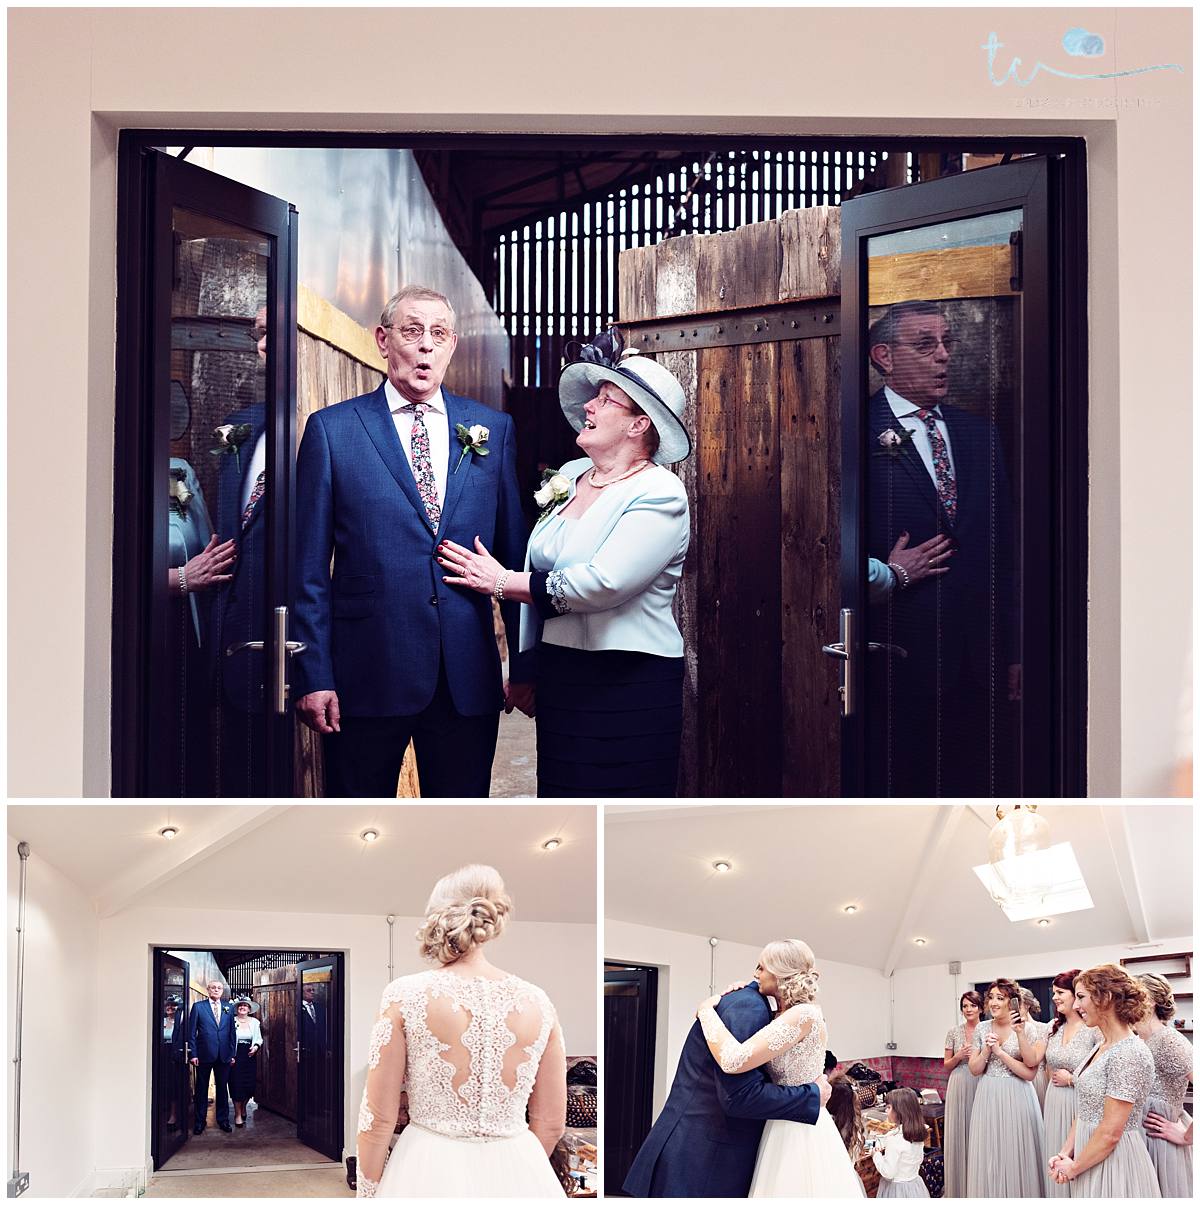 Fun, Relaxed and creative wedding photography - Fun, Relaxed and creative wedding photographer